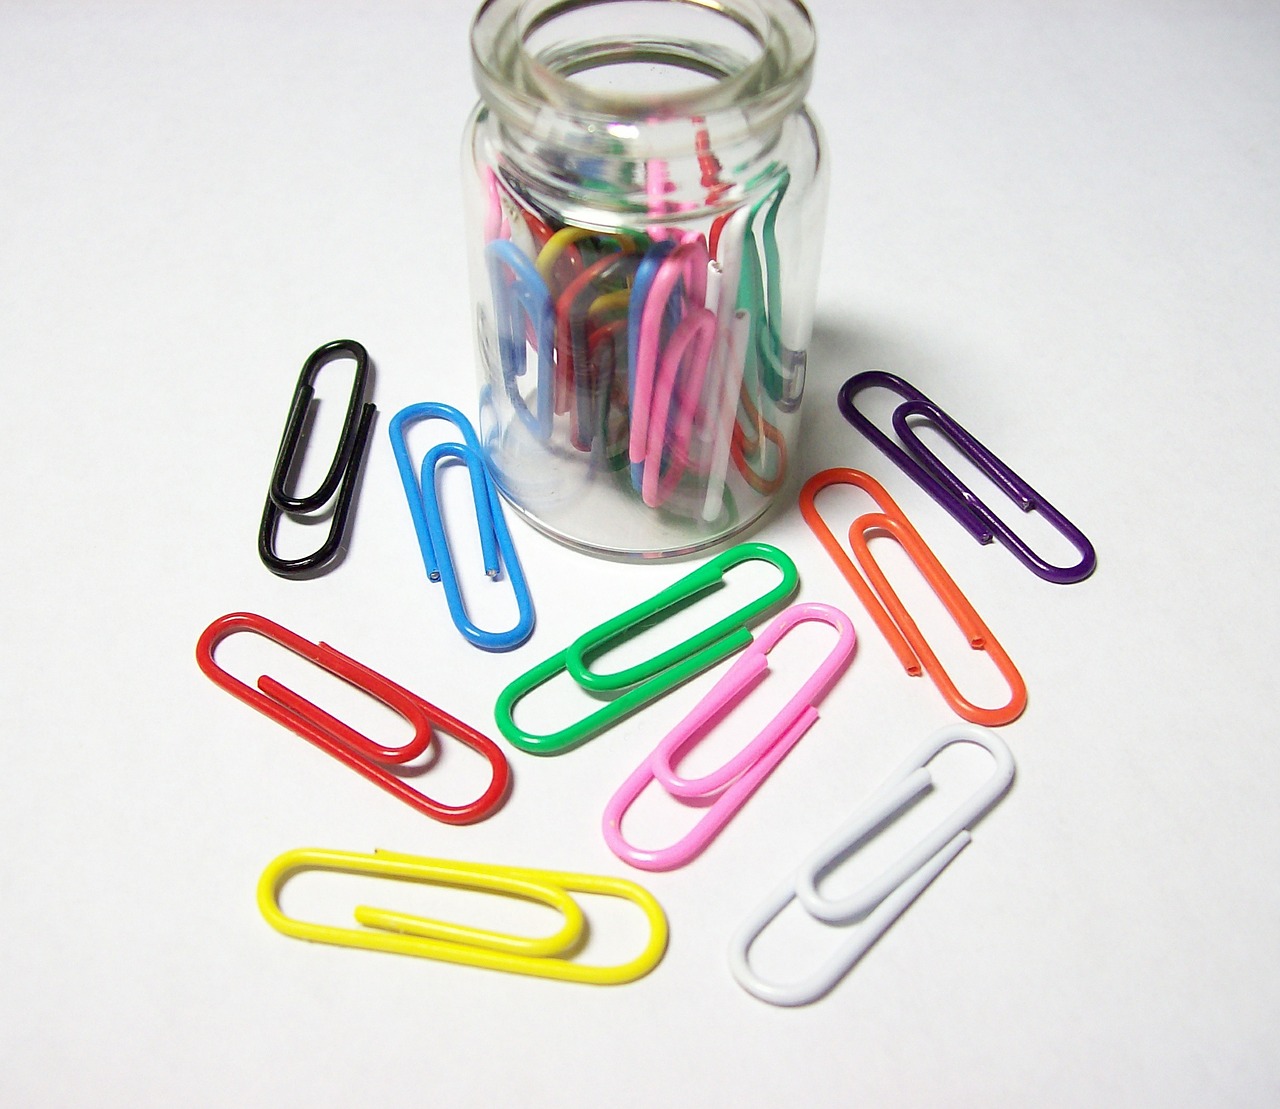 paperclips-593796_1280.jpg